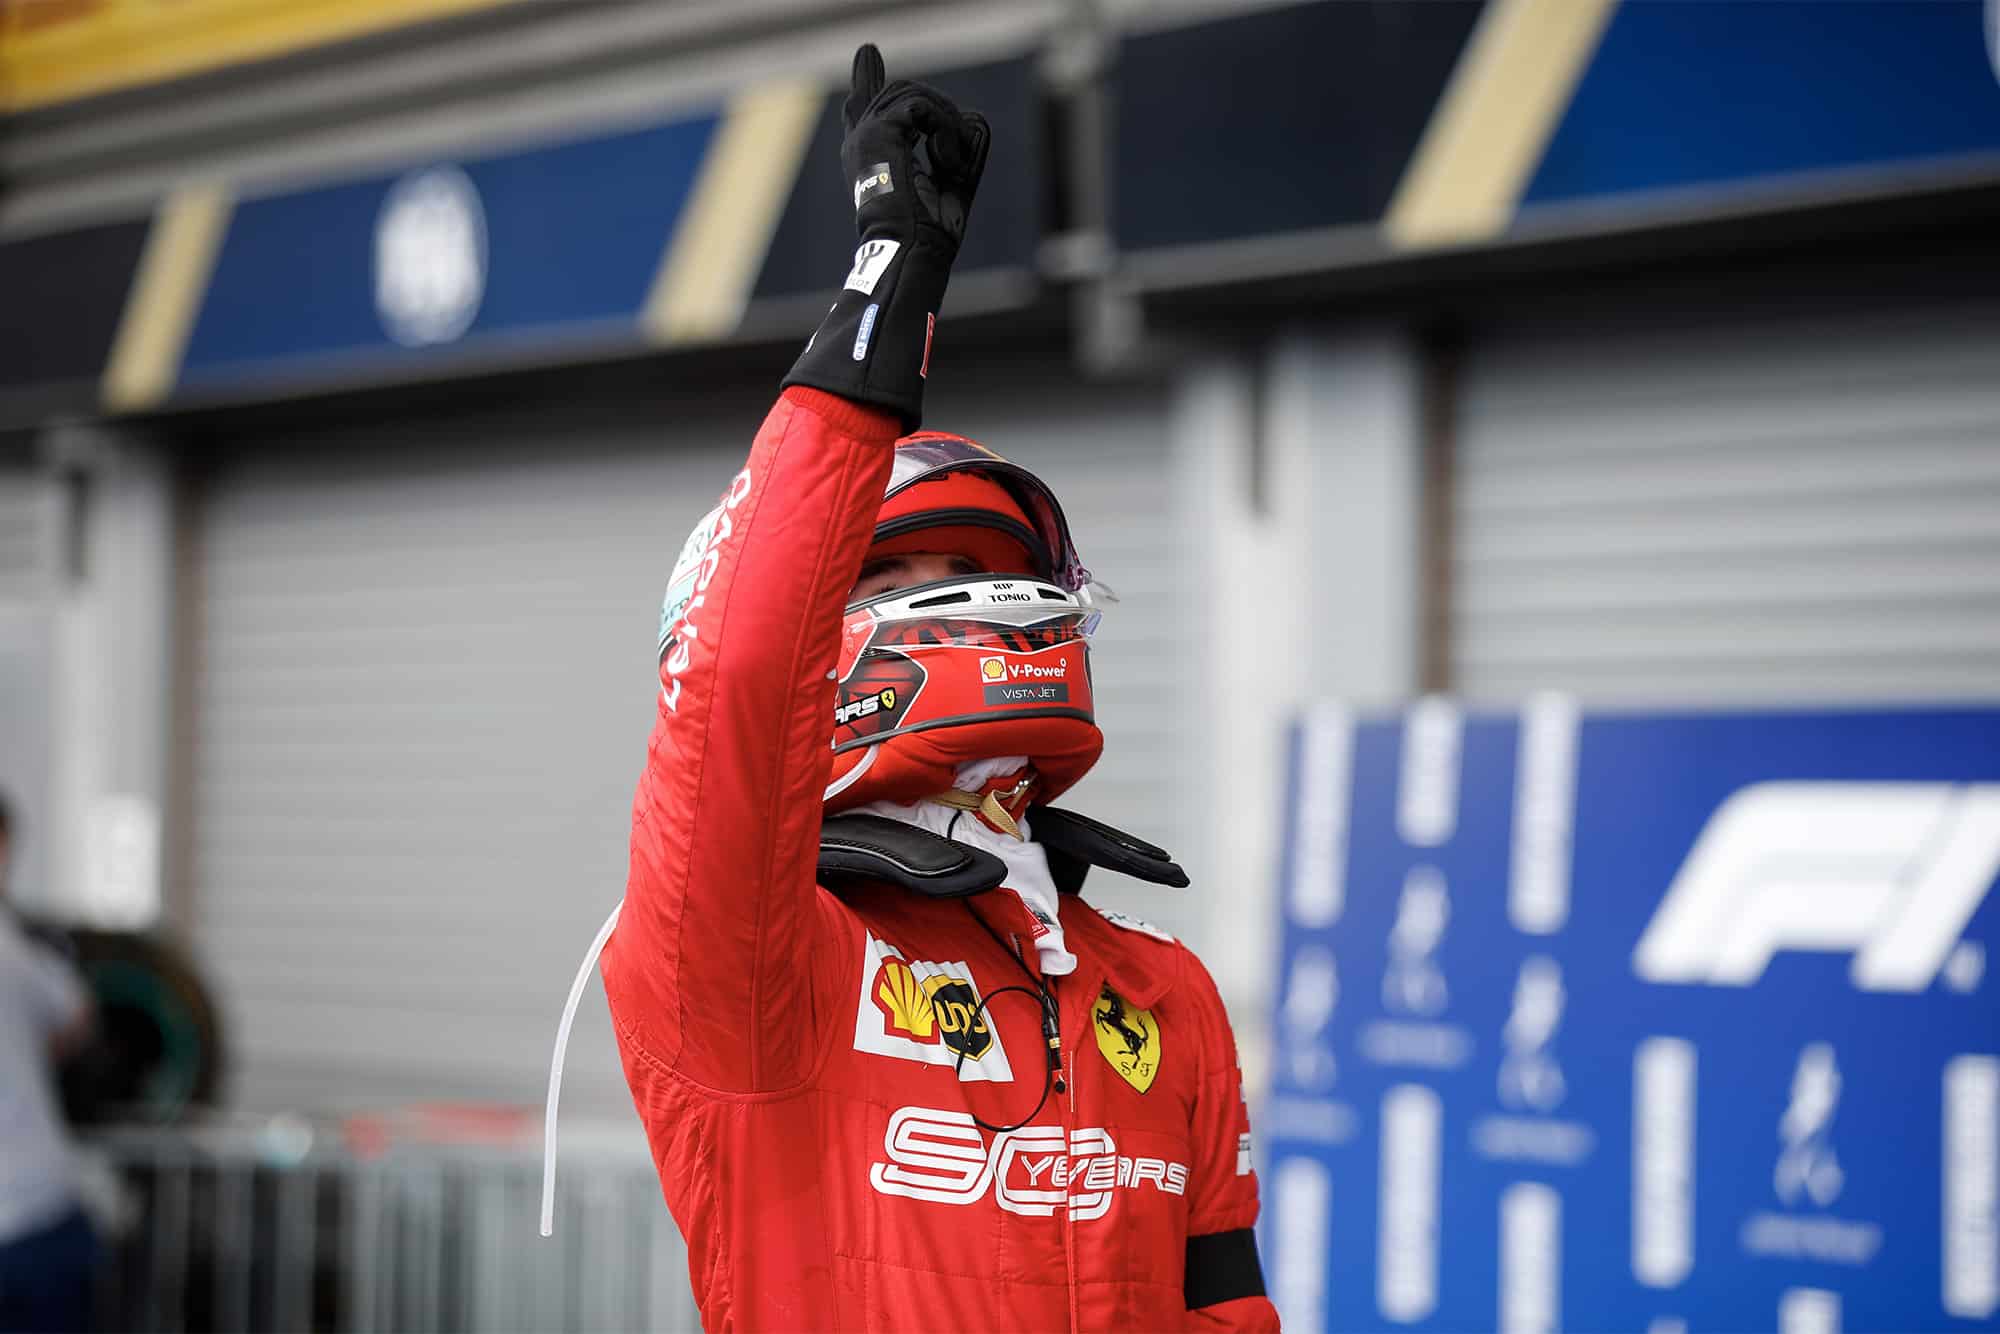 Charles Leclerc after winning the 2019 Belgian Grand Prix